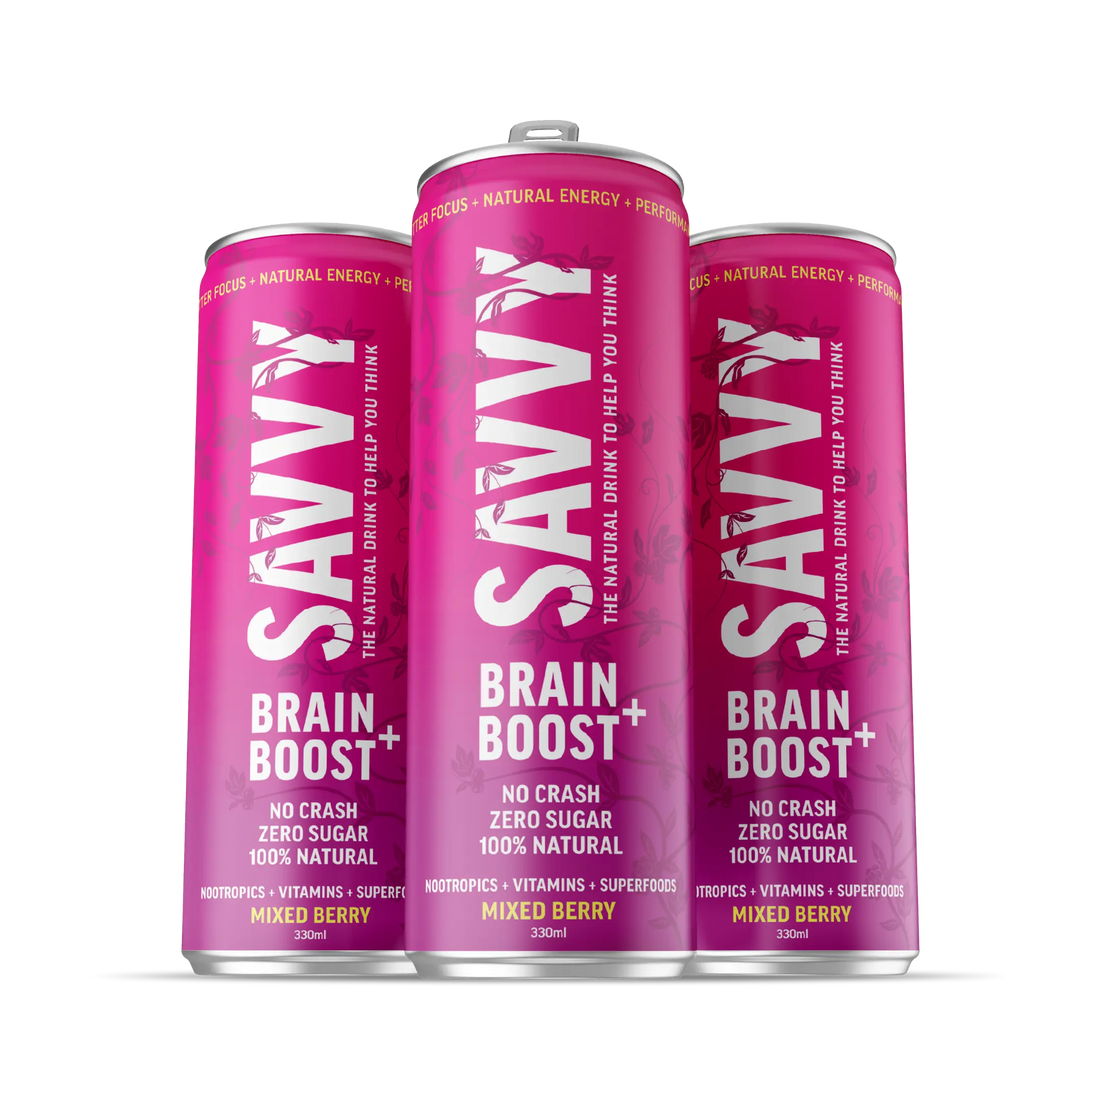 Savvy brain boost mixed berry product images